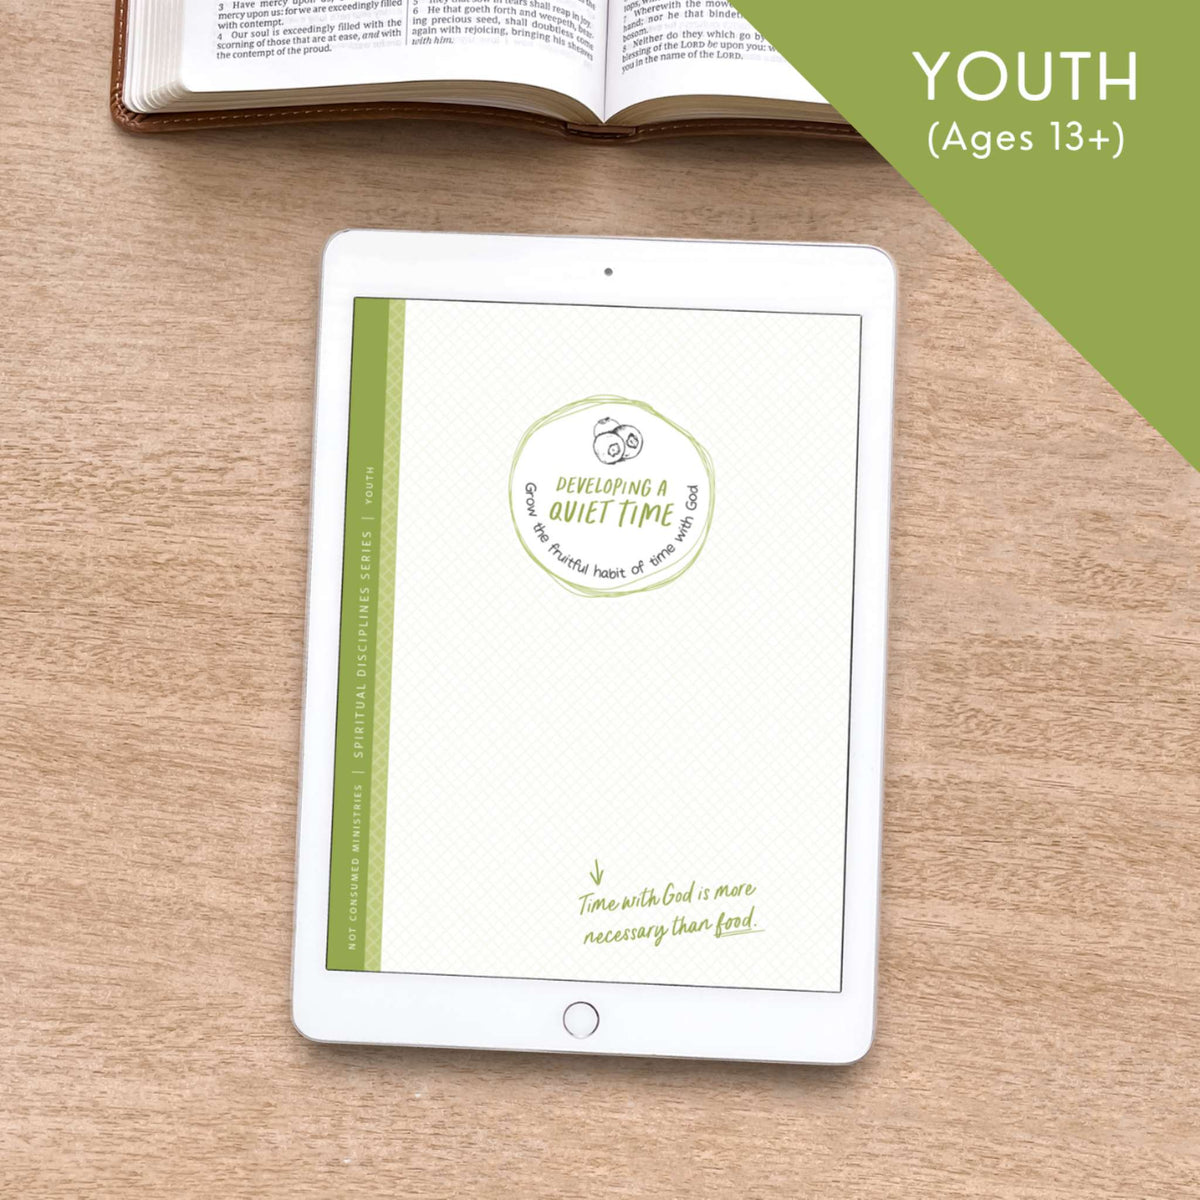 Developing a Quiet Time Teen Bible study for groups